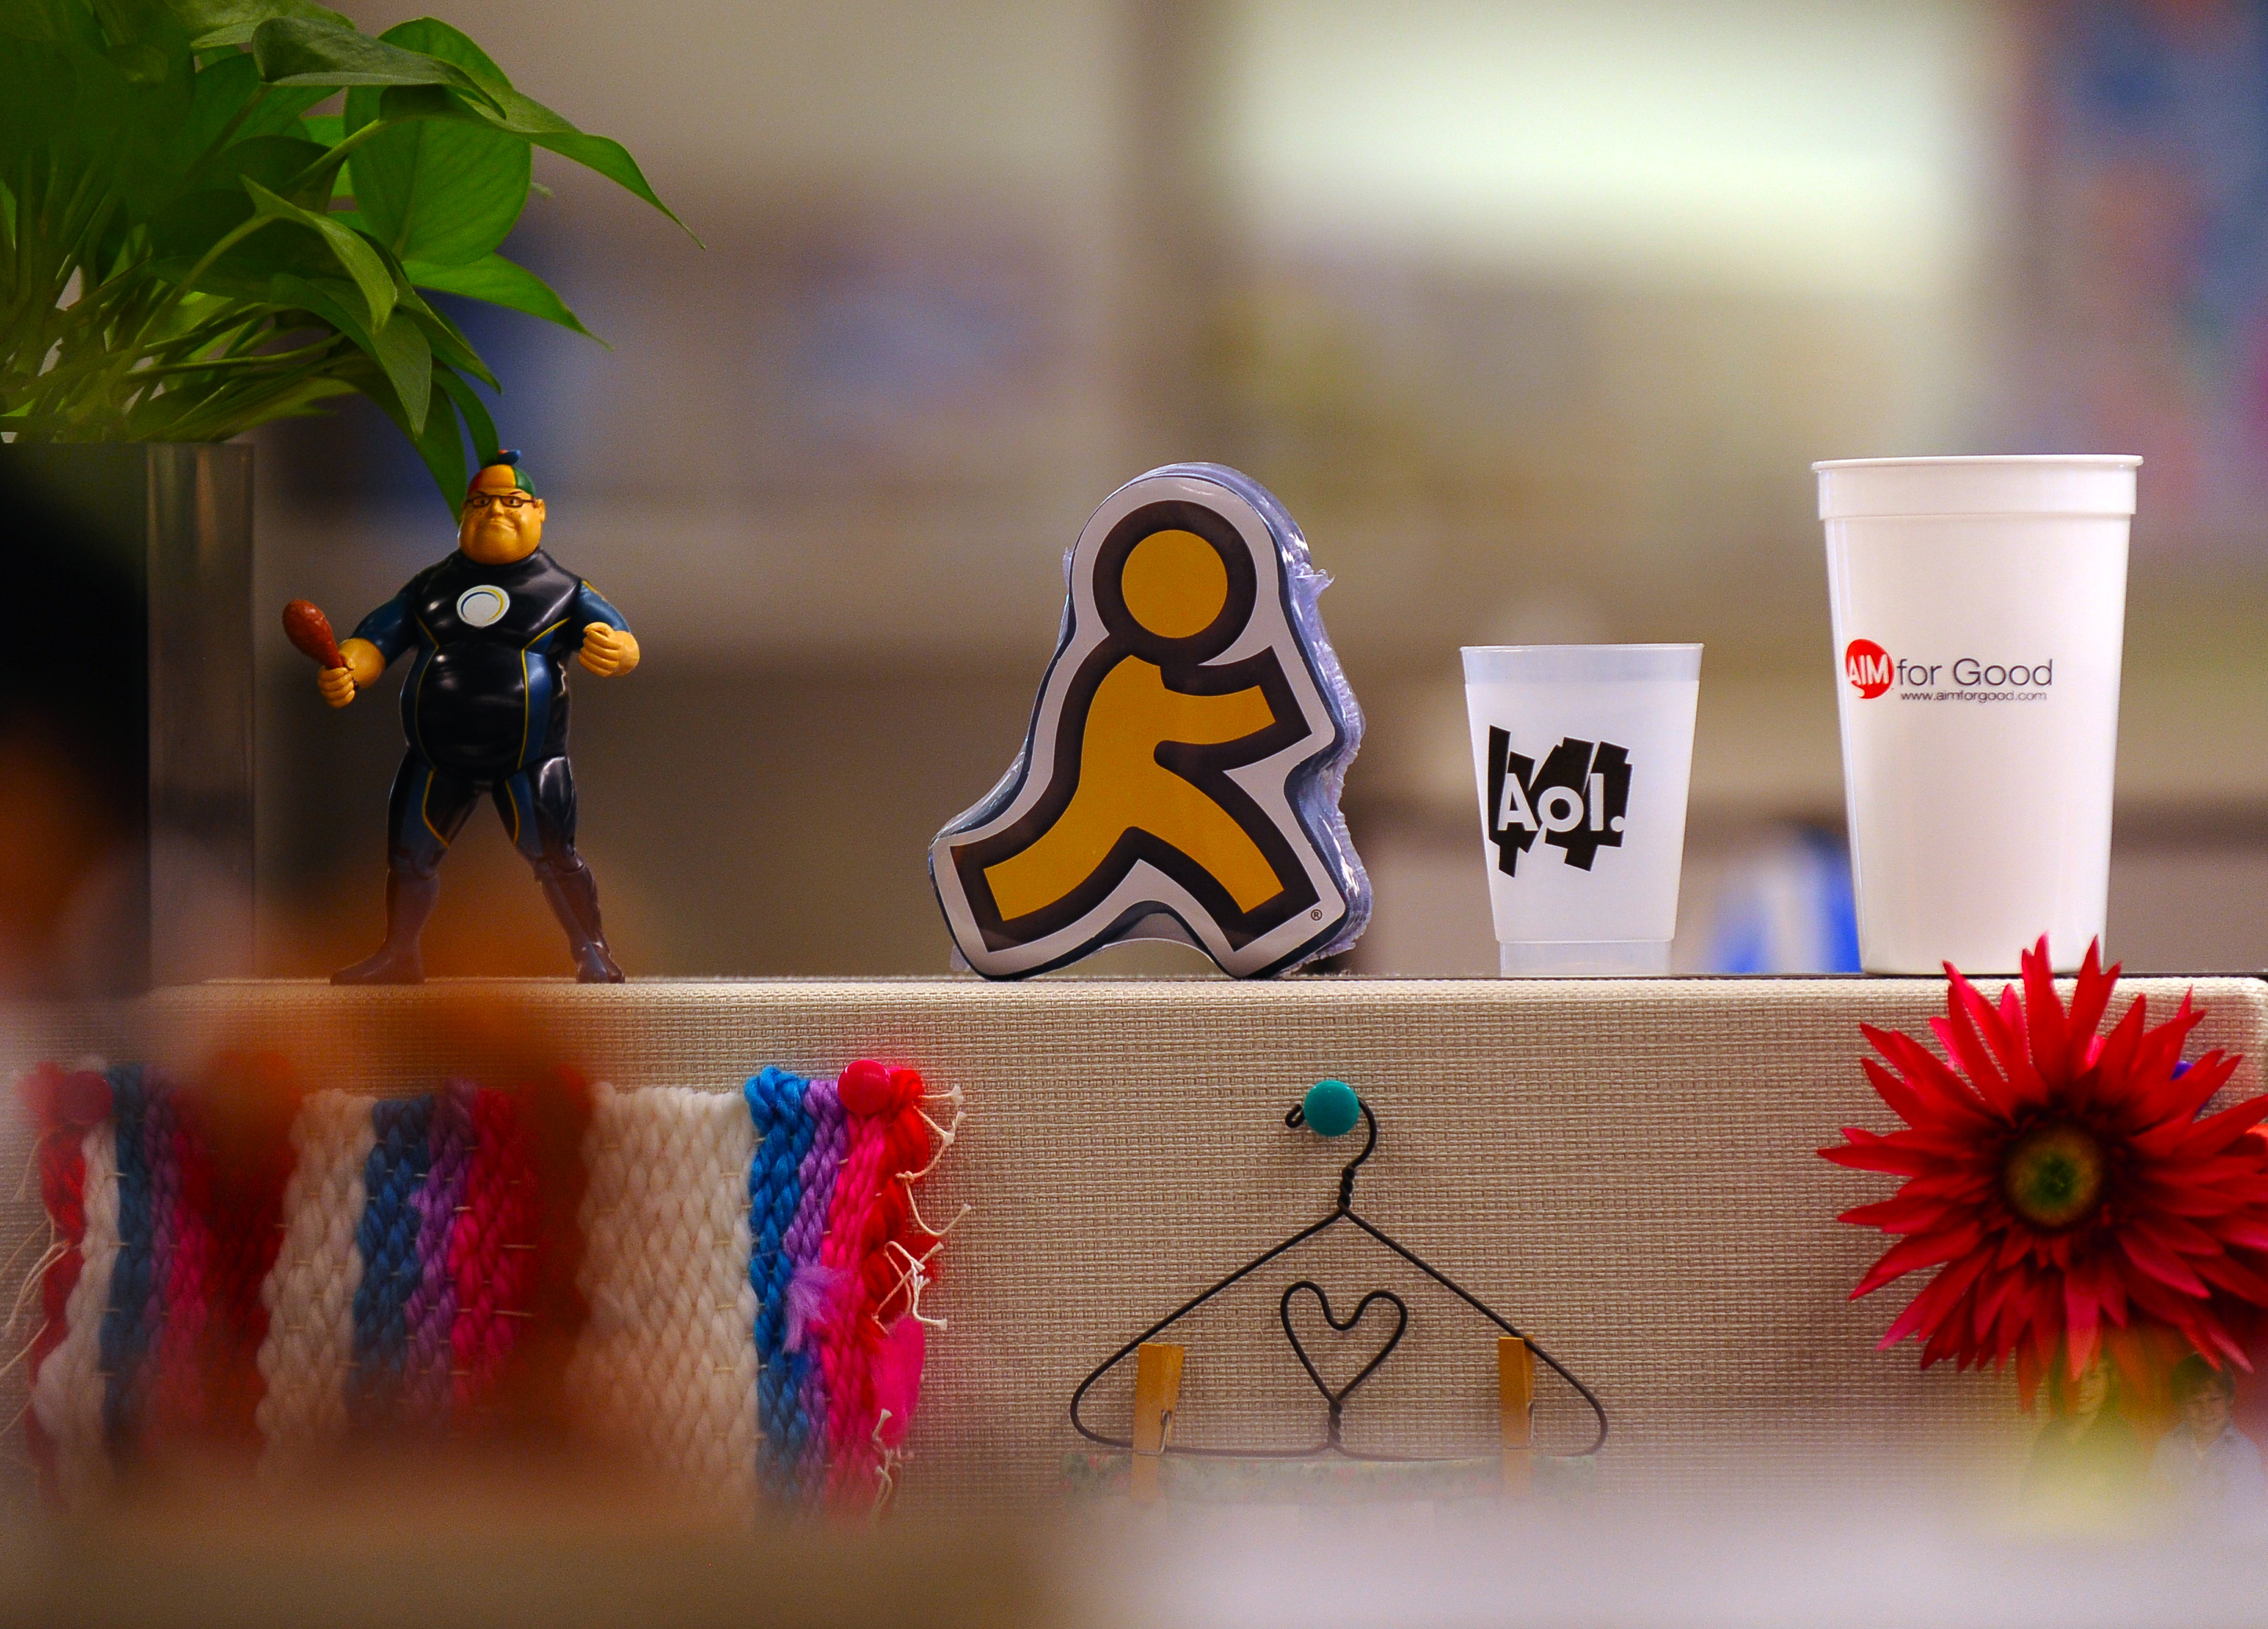 The original AOL logo figurine is displayed at an employee's desk at AOL headquarters on May 19, 2010 in Dulles, VA. (The Washington Post&mdash;Washington Post/Getty Images)